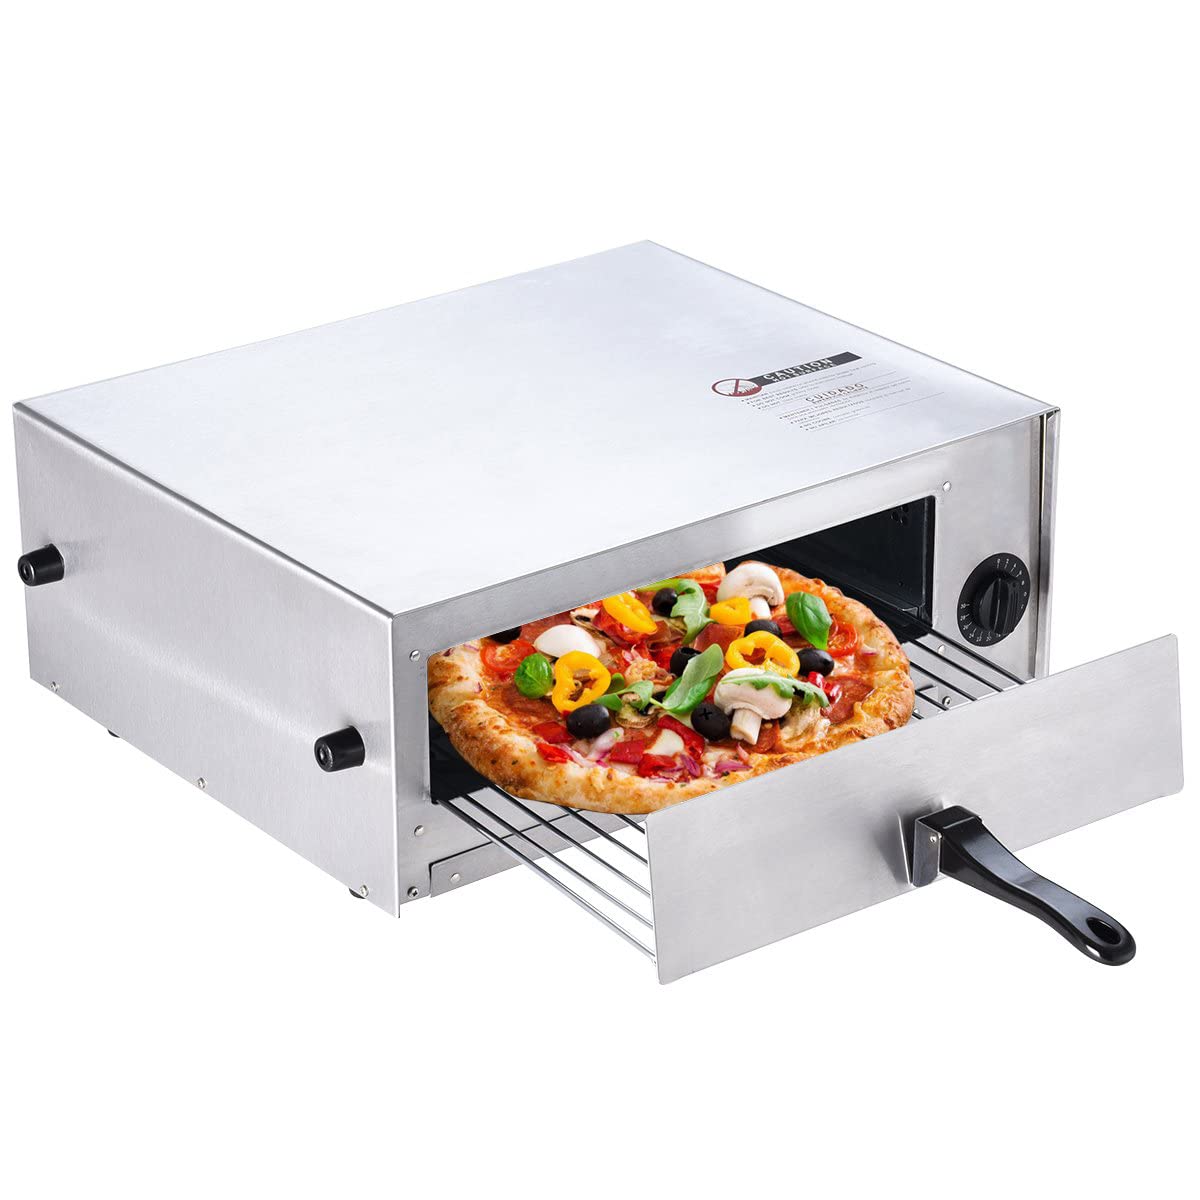 Happygrill Electric Pizza Oven Stainless Steel Pizza Baker Kitchen Pizza Toaster Pizza Maker with Handle & Removable Tray